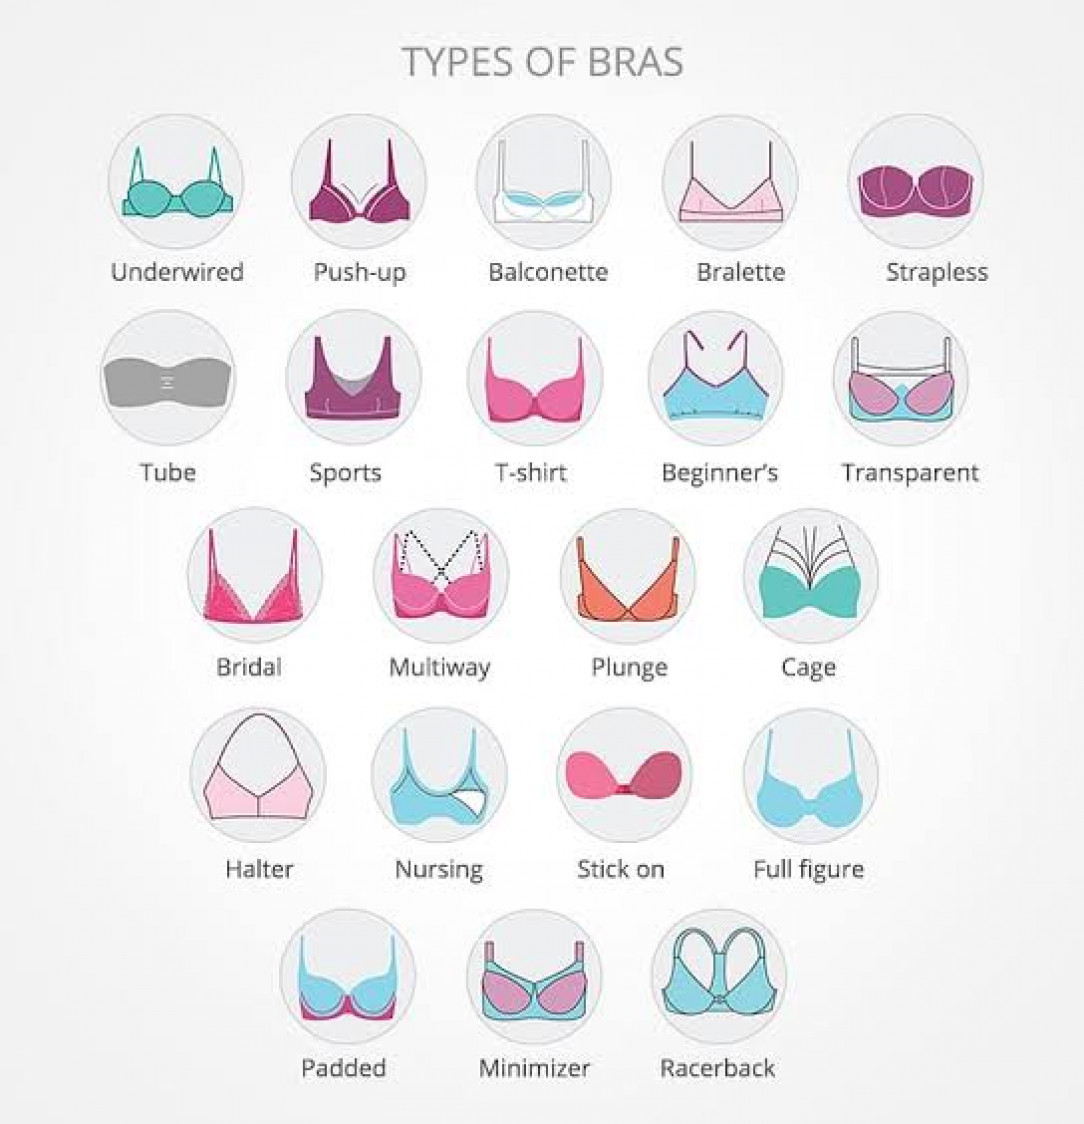 A guide to different types of bras